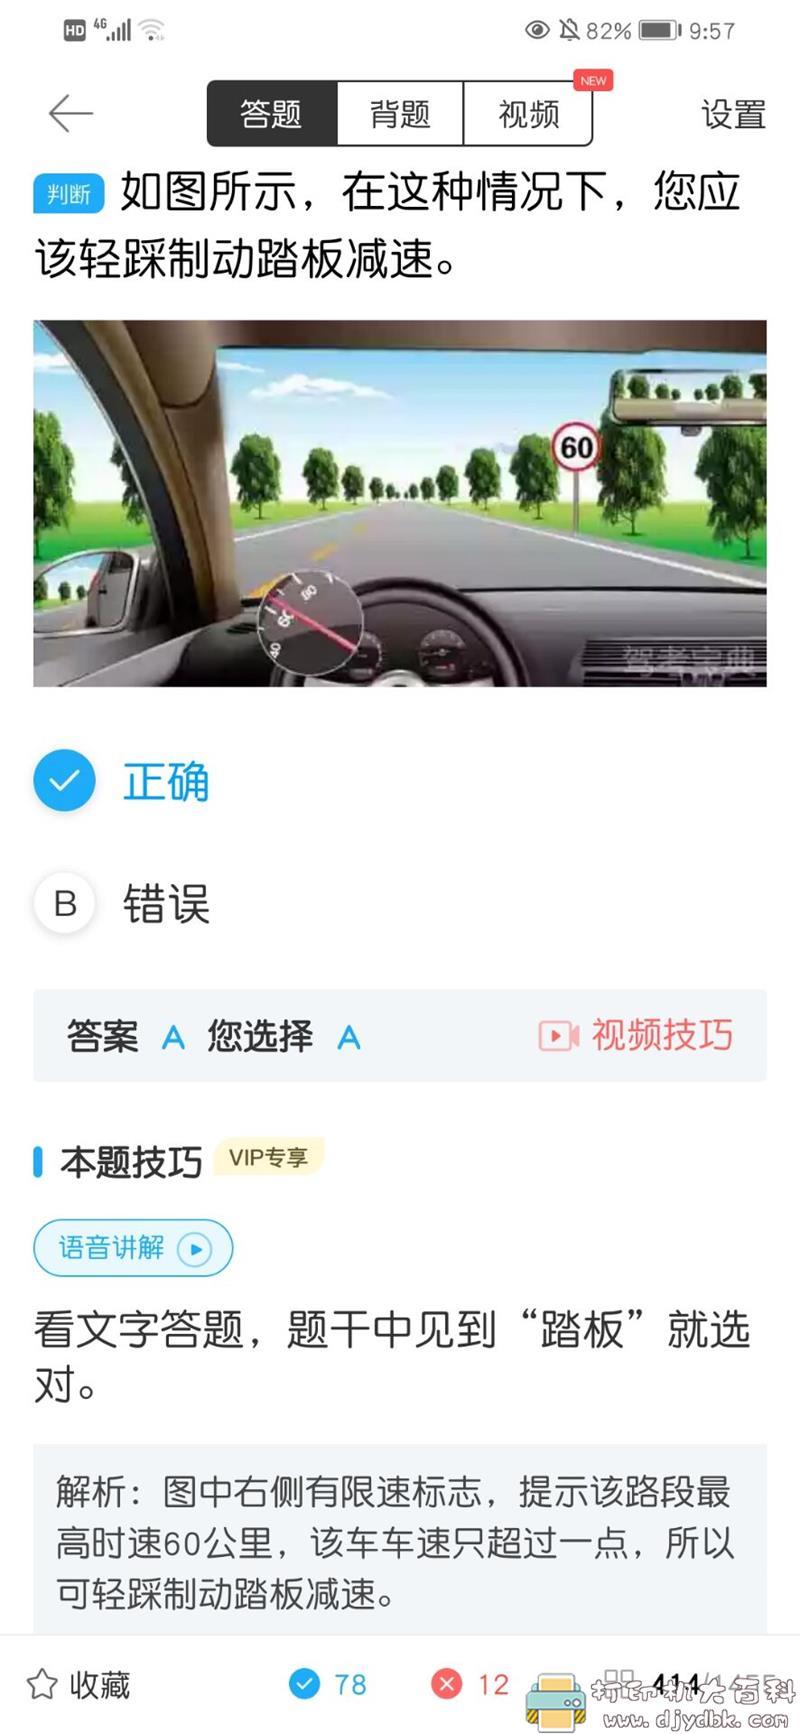 [Android]驾考宝典 v7.7.0 （解锁会员去广告） 配图 No.5